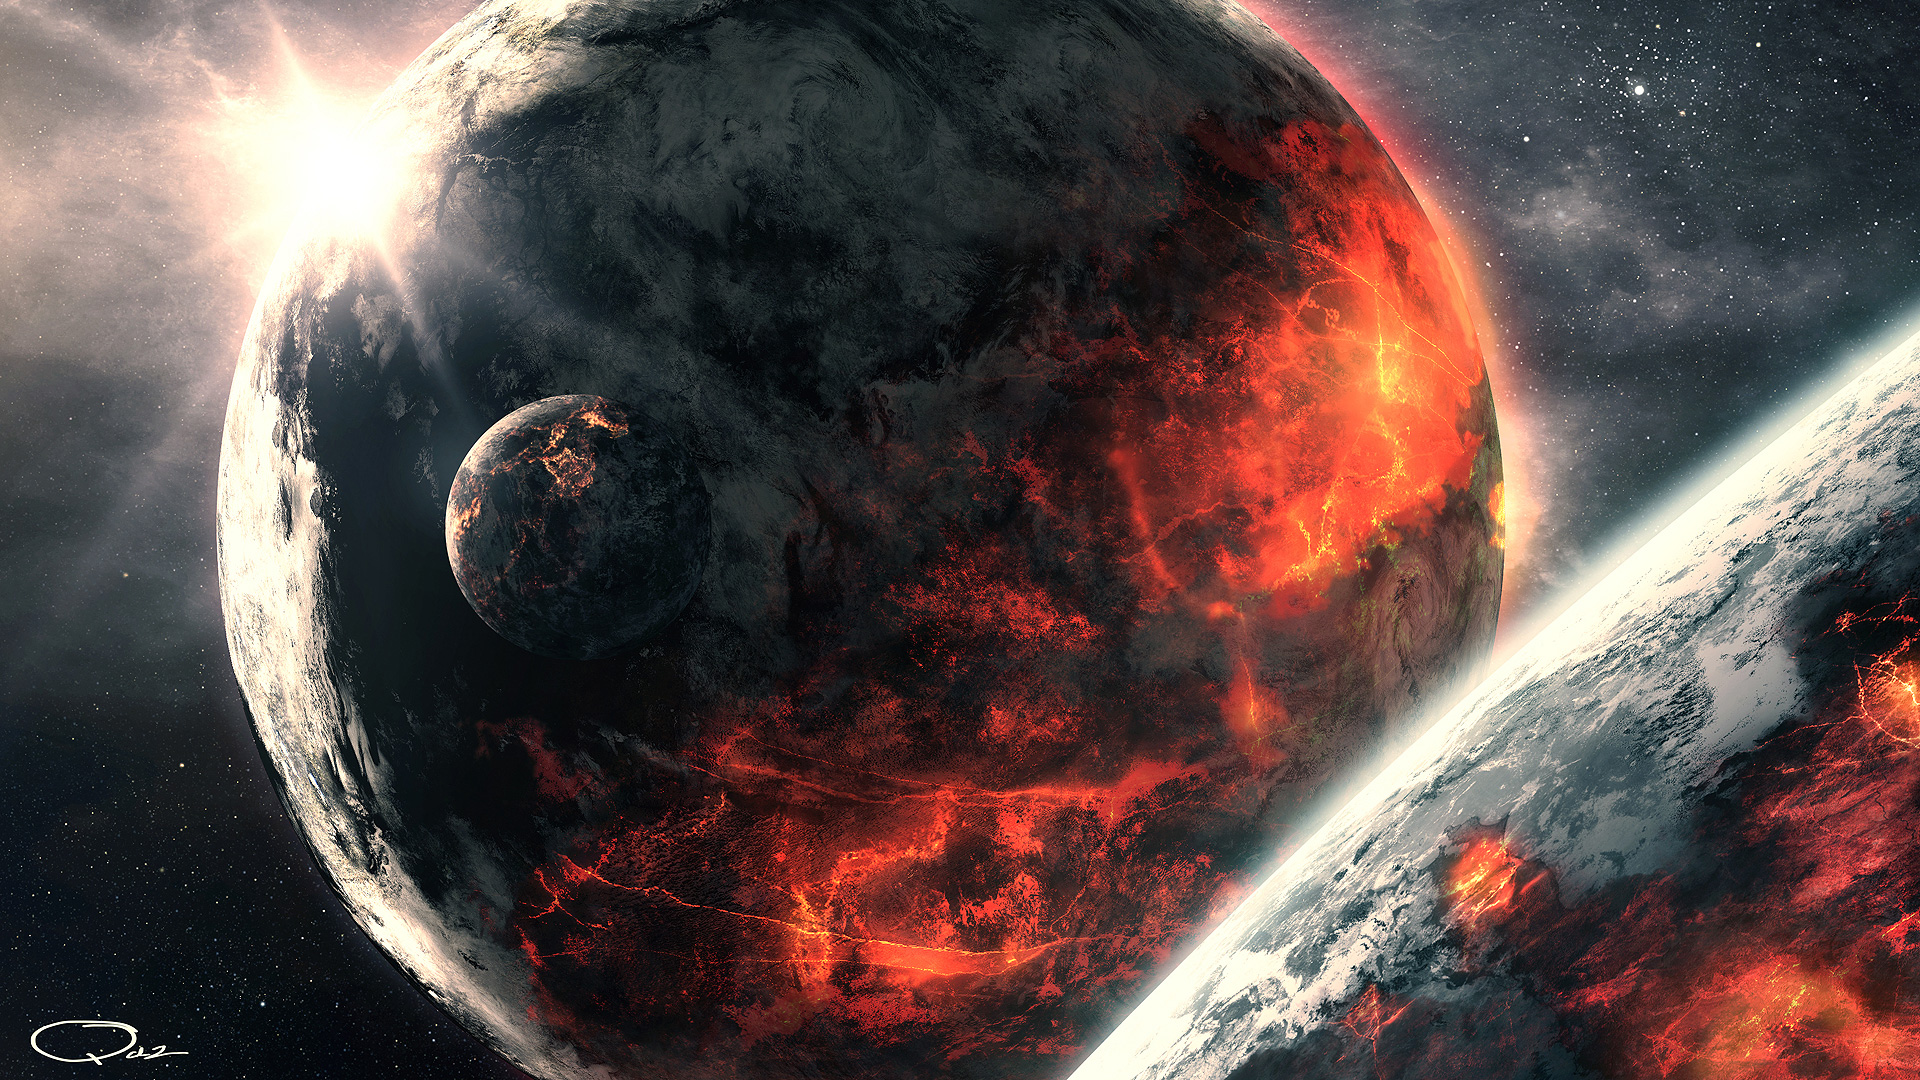 Free download space 1080p wallpaper full hd volcanic ...